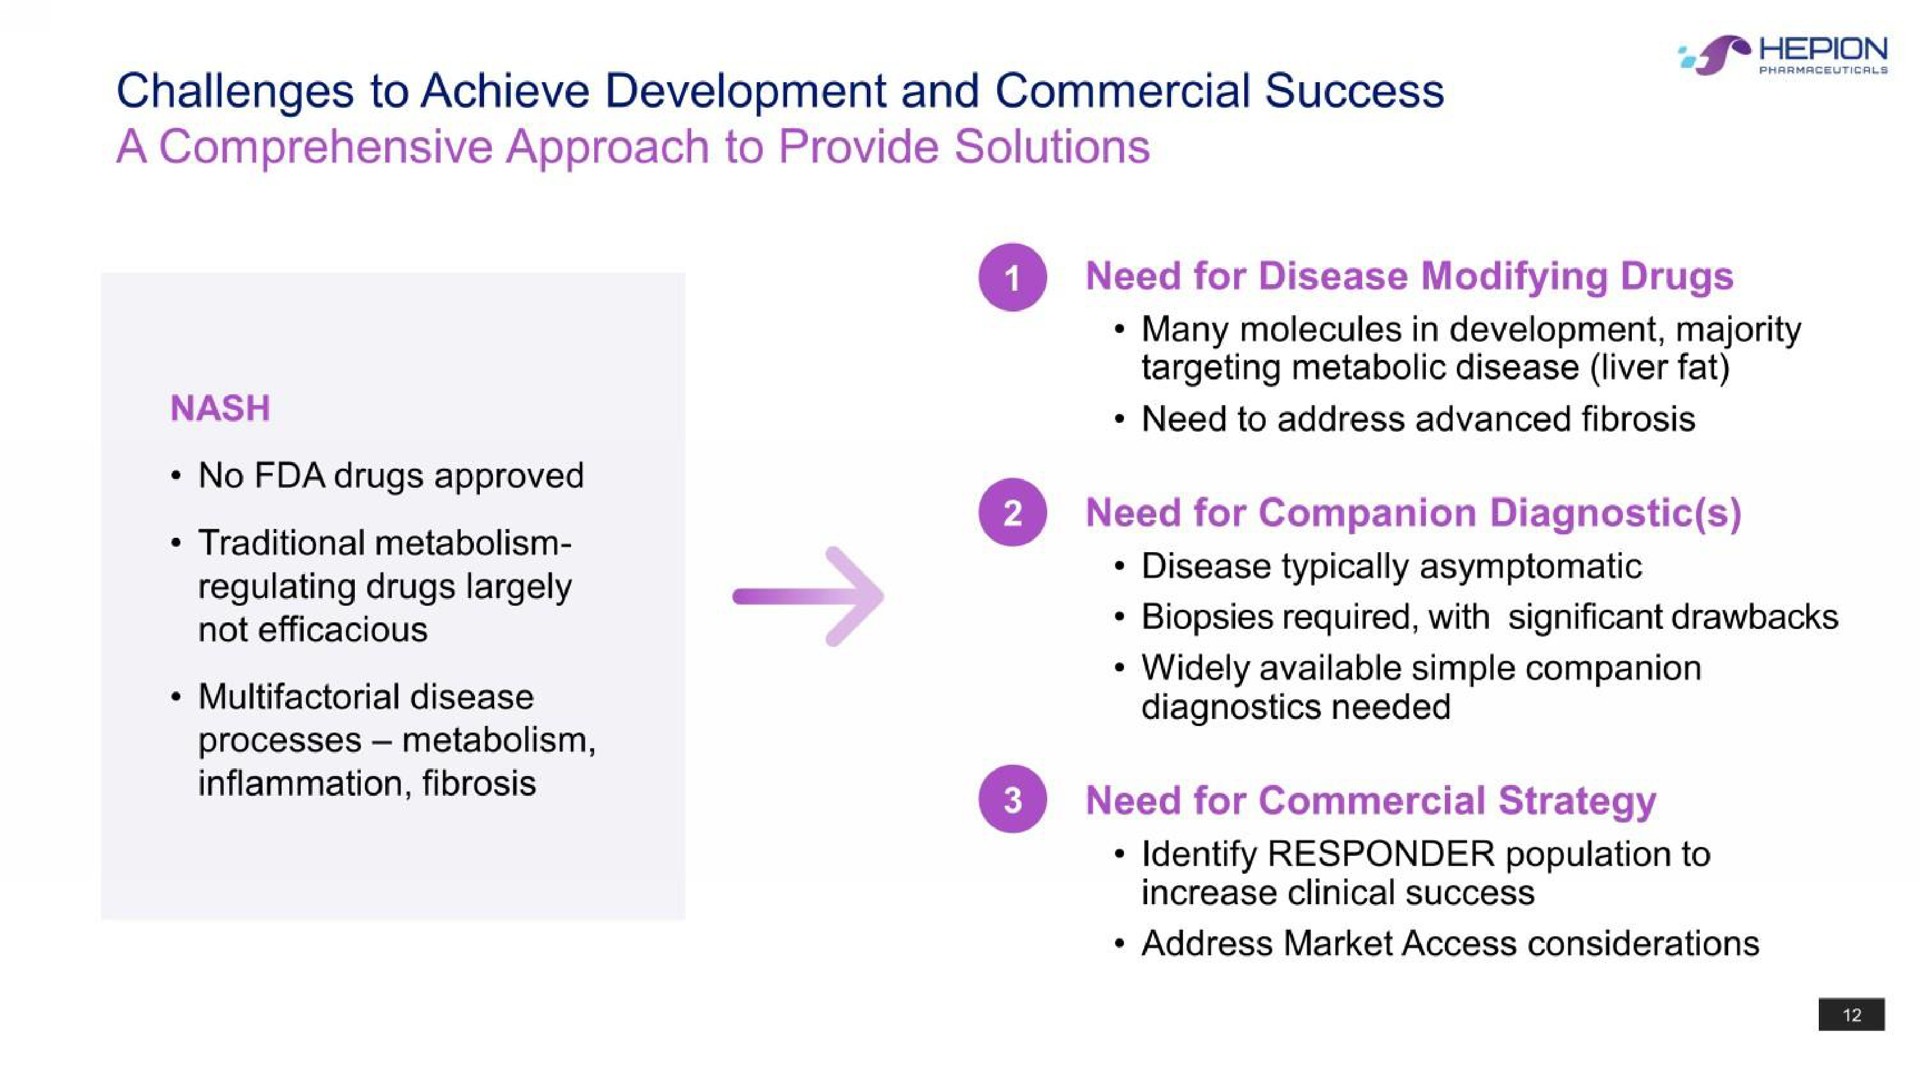 challenges to achieve development and commercial success a comprehensive approach to provide solutions need for commercial strategy | Hepion Pharmaceuticals